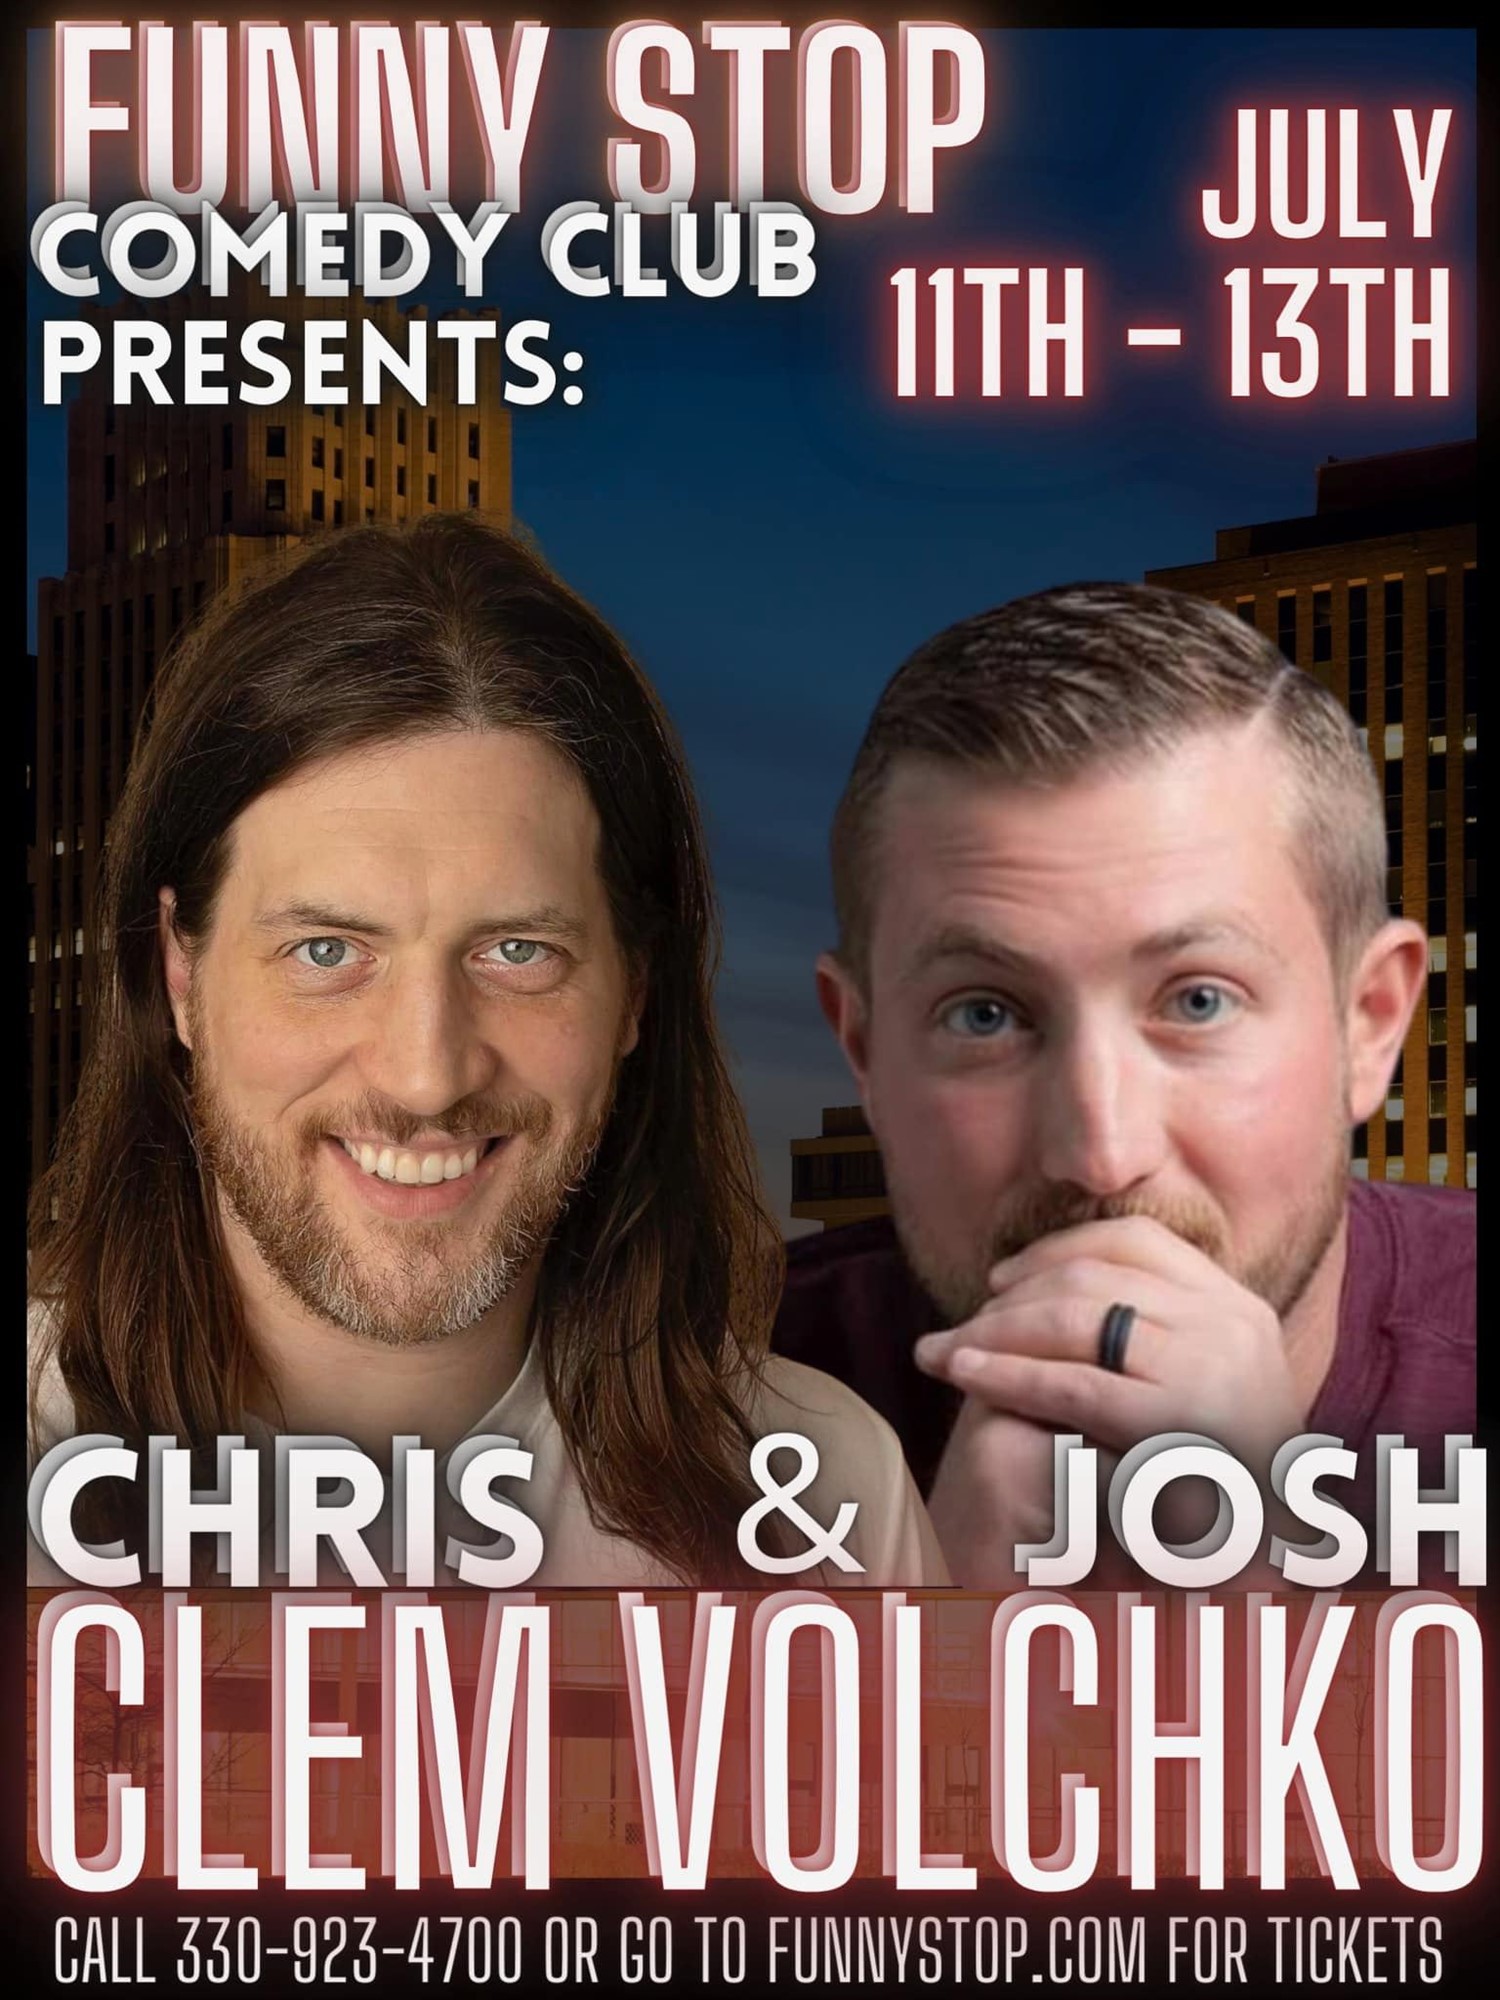 Chris Clem & Josh Volchko - Sat. 7:30PM Show Funny Stop Comedy Club on Jul 13, 19:30@Funny Stop Comedy Club - Buy tickets and Get information on Funny Stop funnystop.online